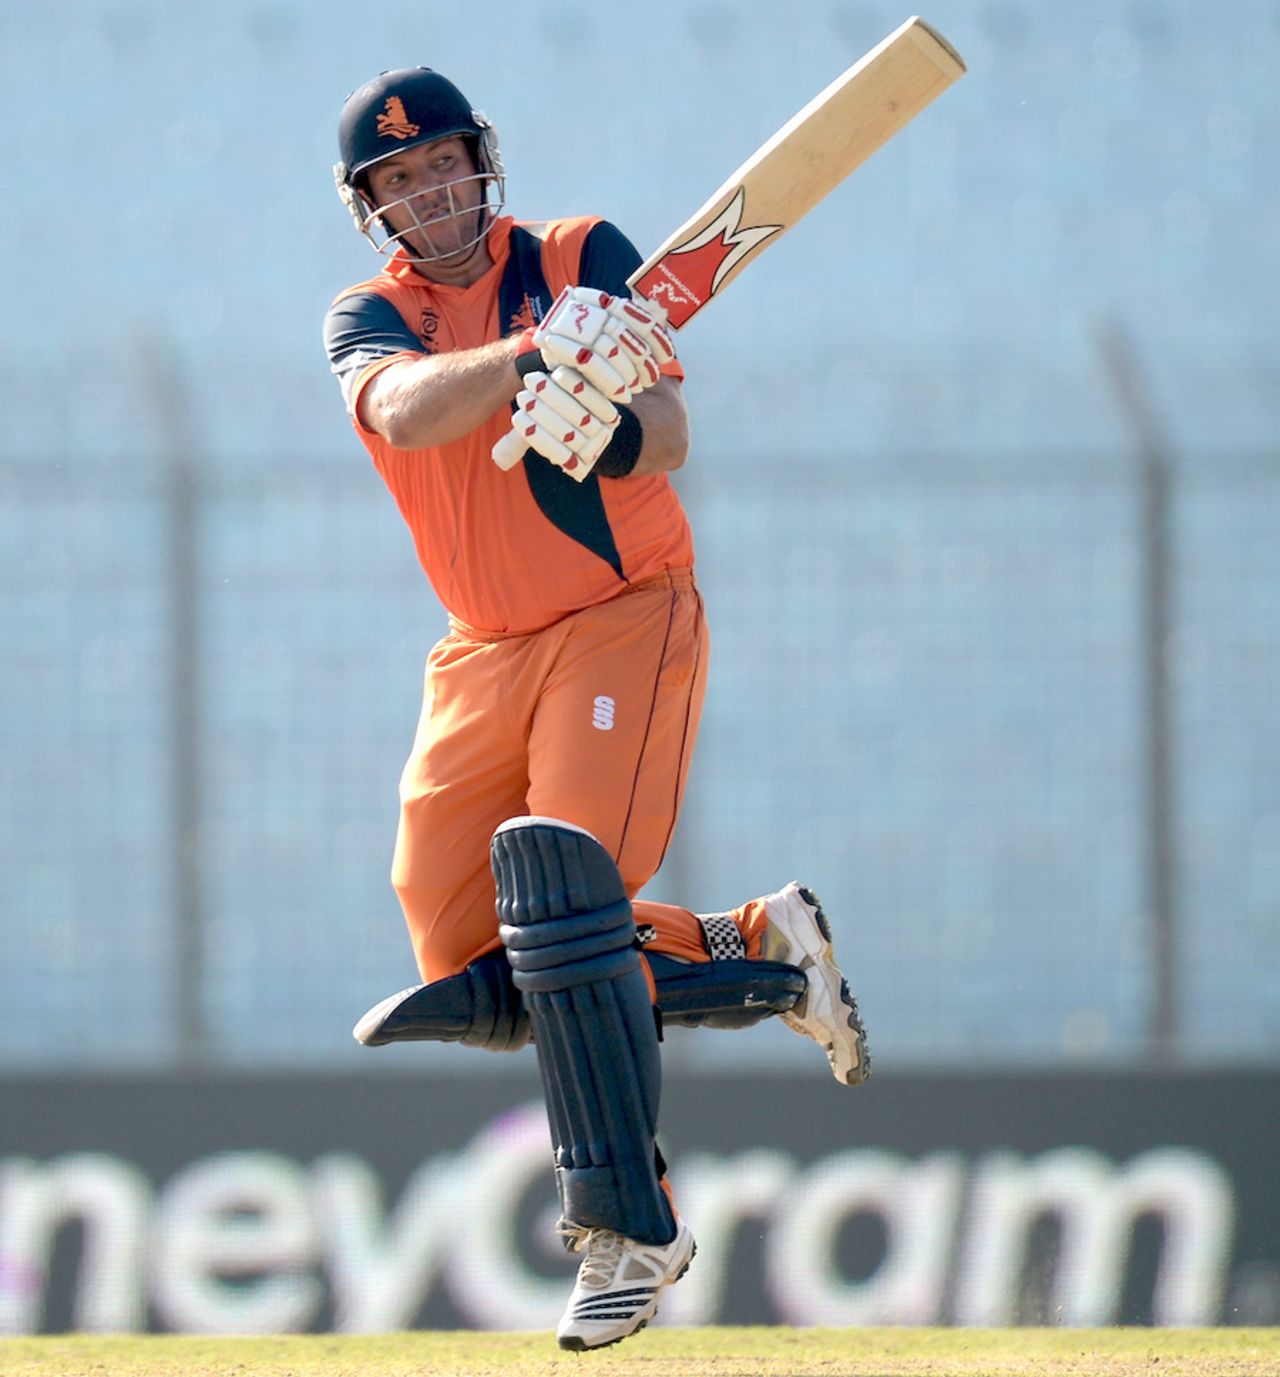 Michael Swart scored a useful 26 before being stumped off Nathan McCullum, Netherlands v New Zealand, World T20, Group 1, Chittagong, March 29, 2014